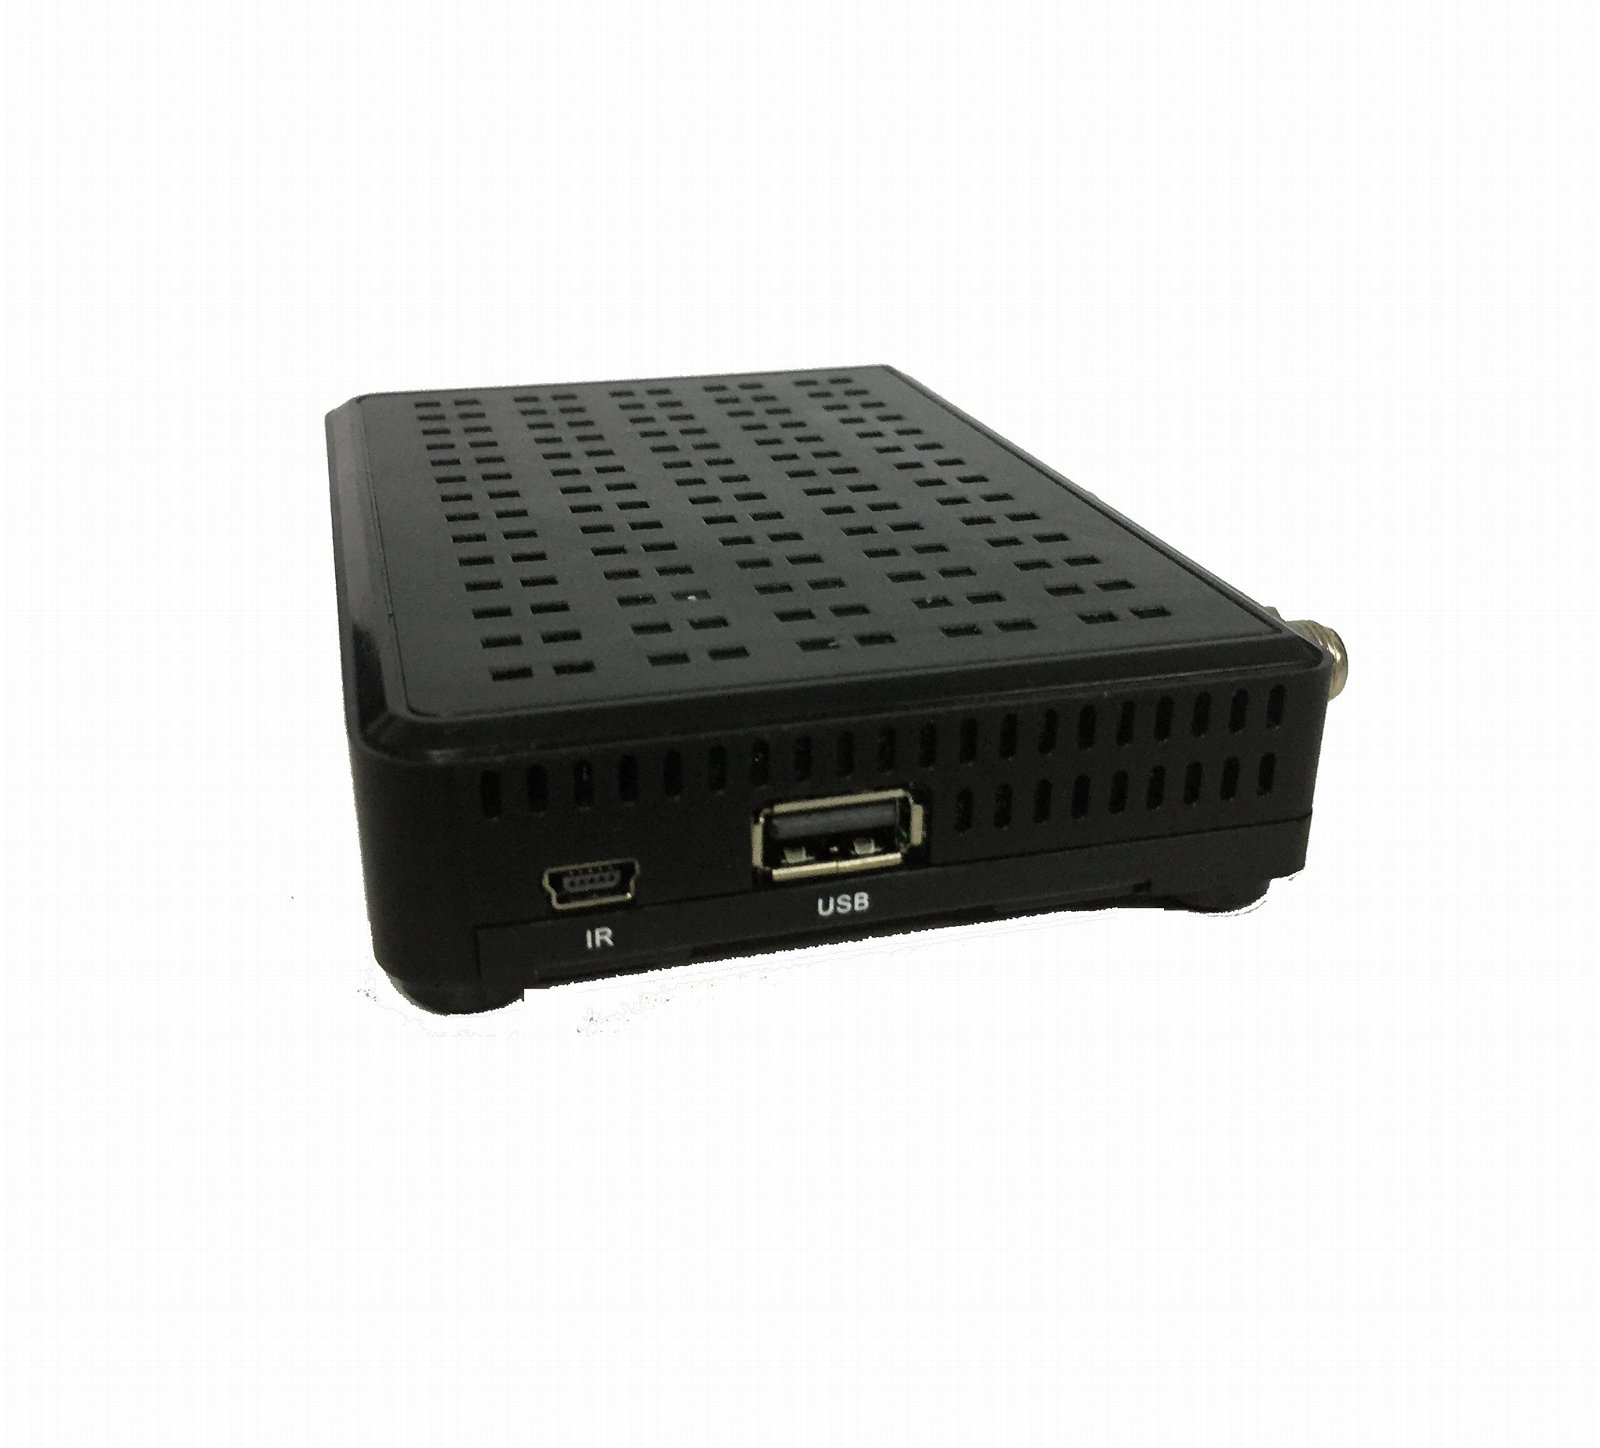 Full HD receiver with smart card sharing linux system 5